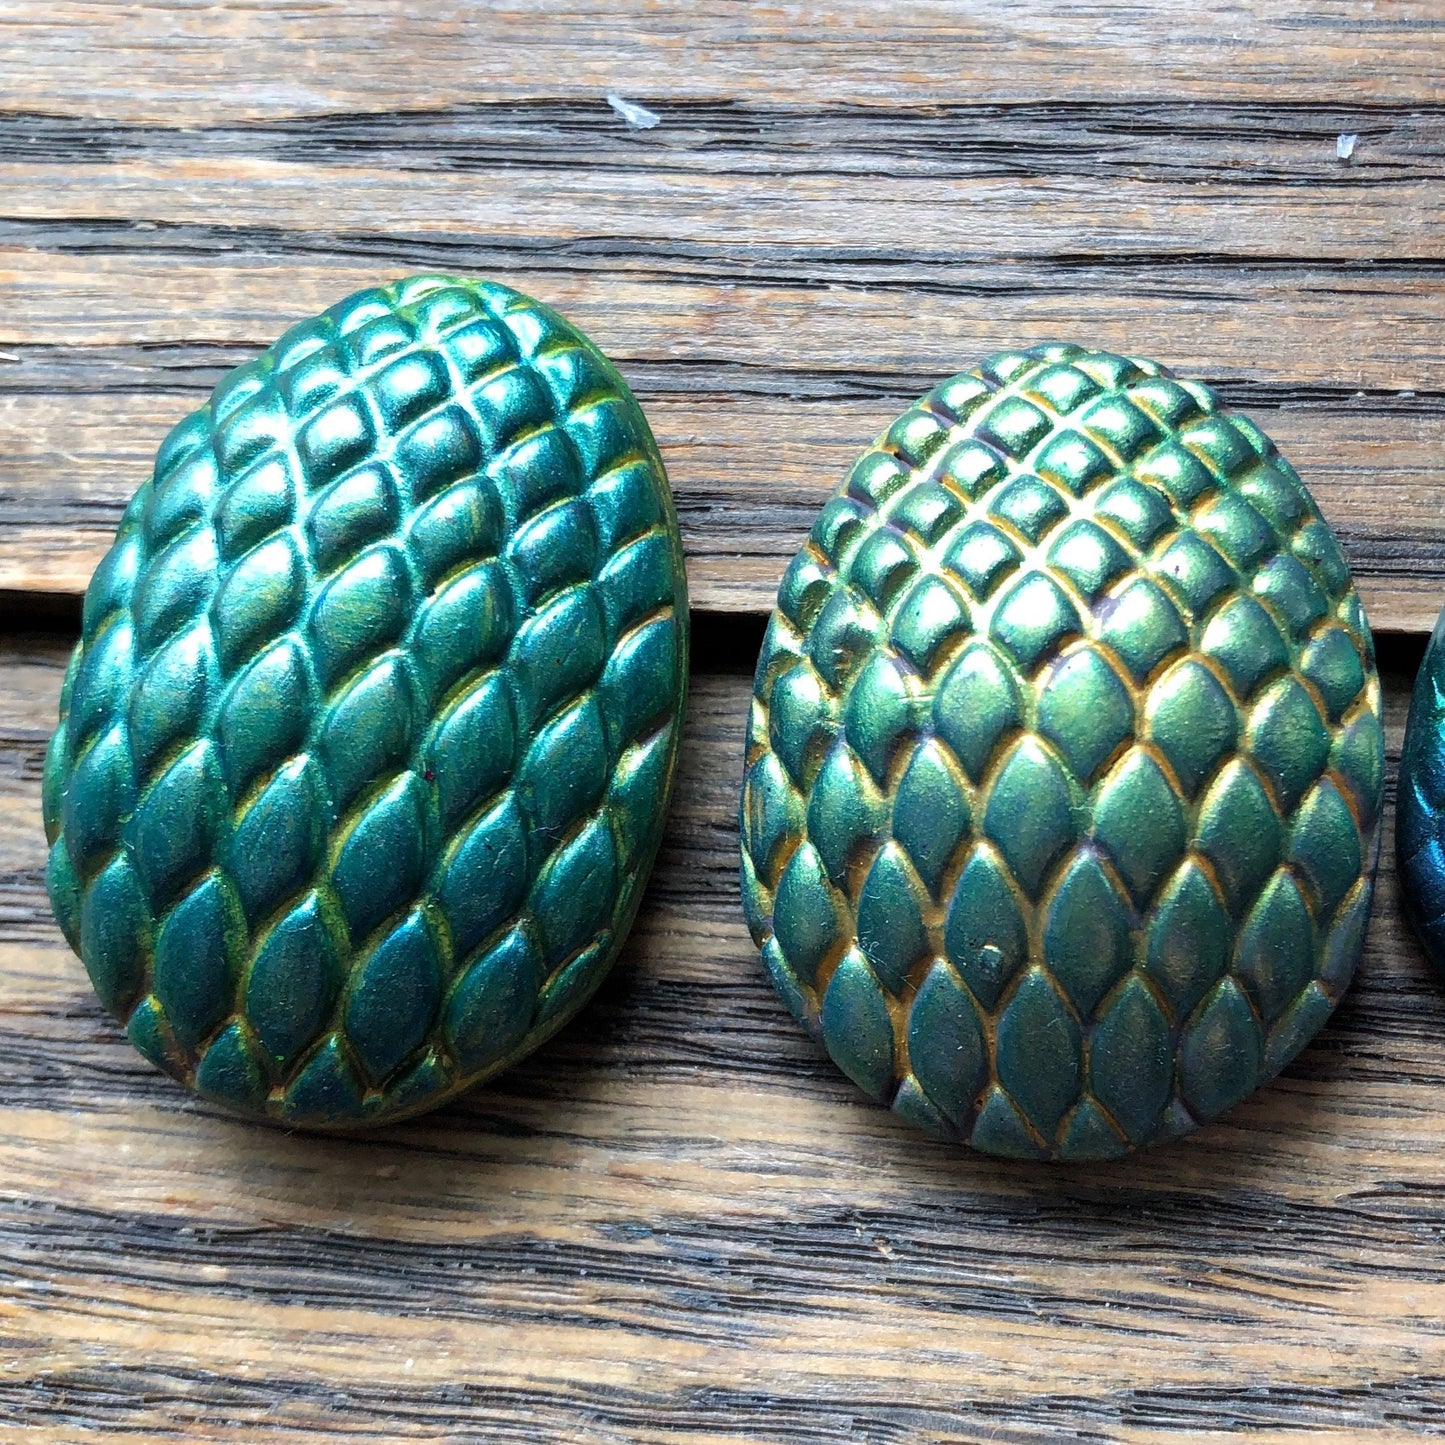 Dragon egg cabochon cutter set, including roller - made for use with polymer clay